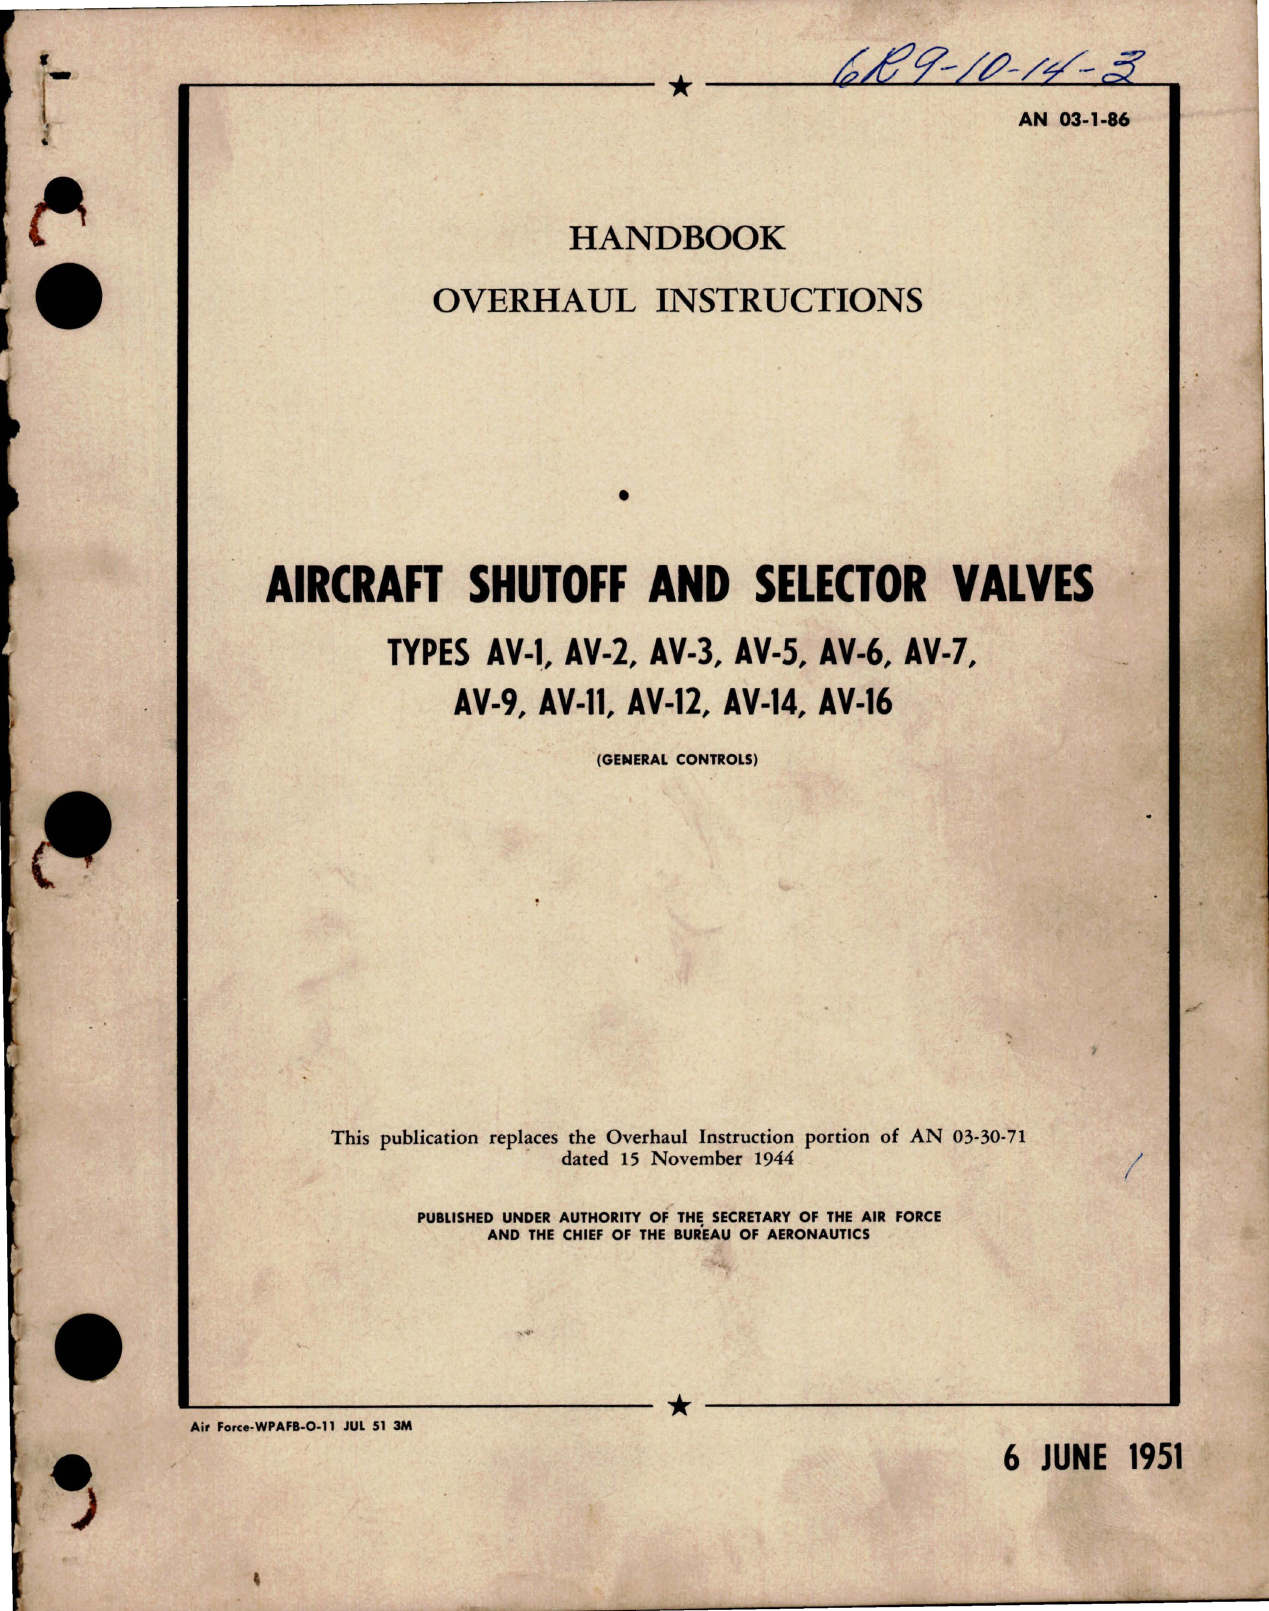 Sample page 1 from AirCorps Library document: Overhaul Instructions for Aircraft Shutoff and Selector Valves 